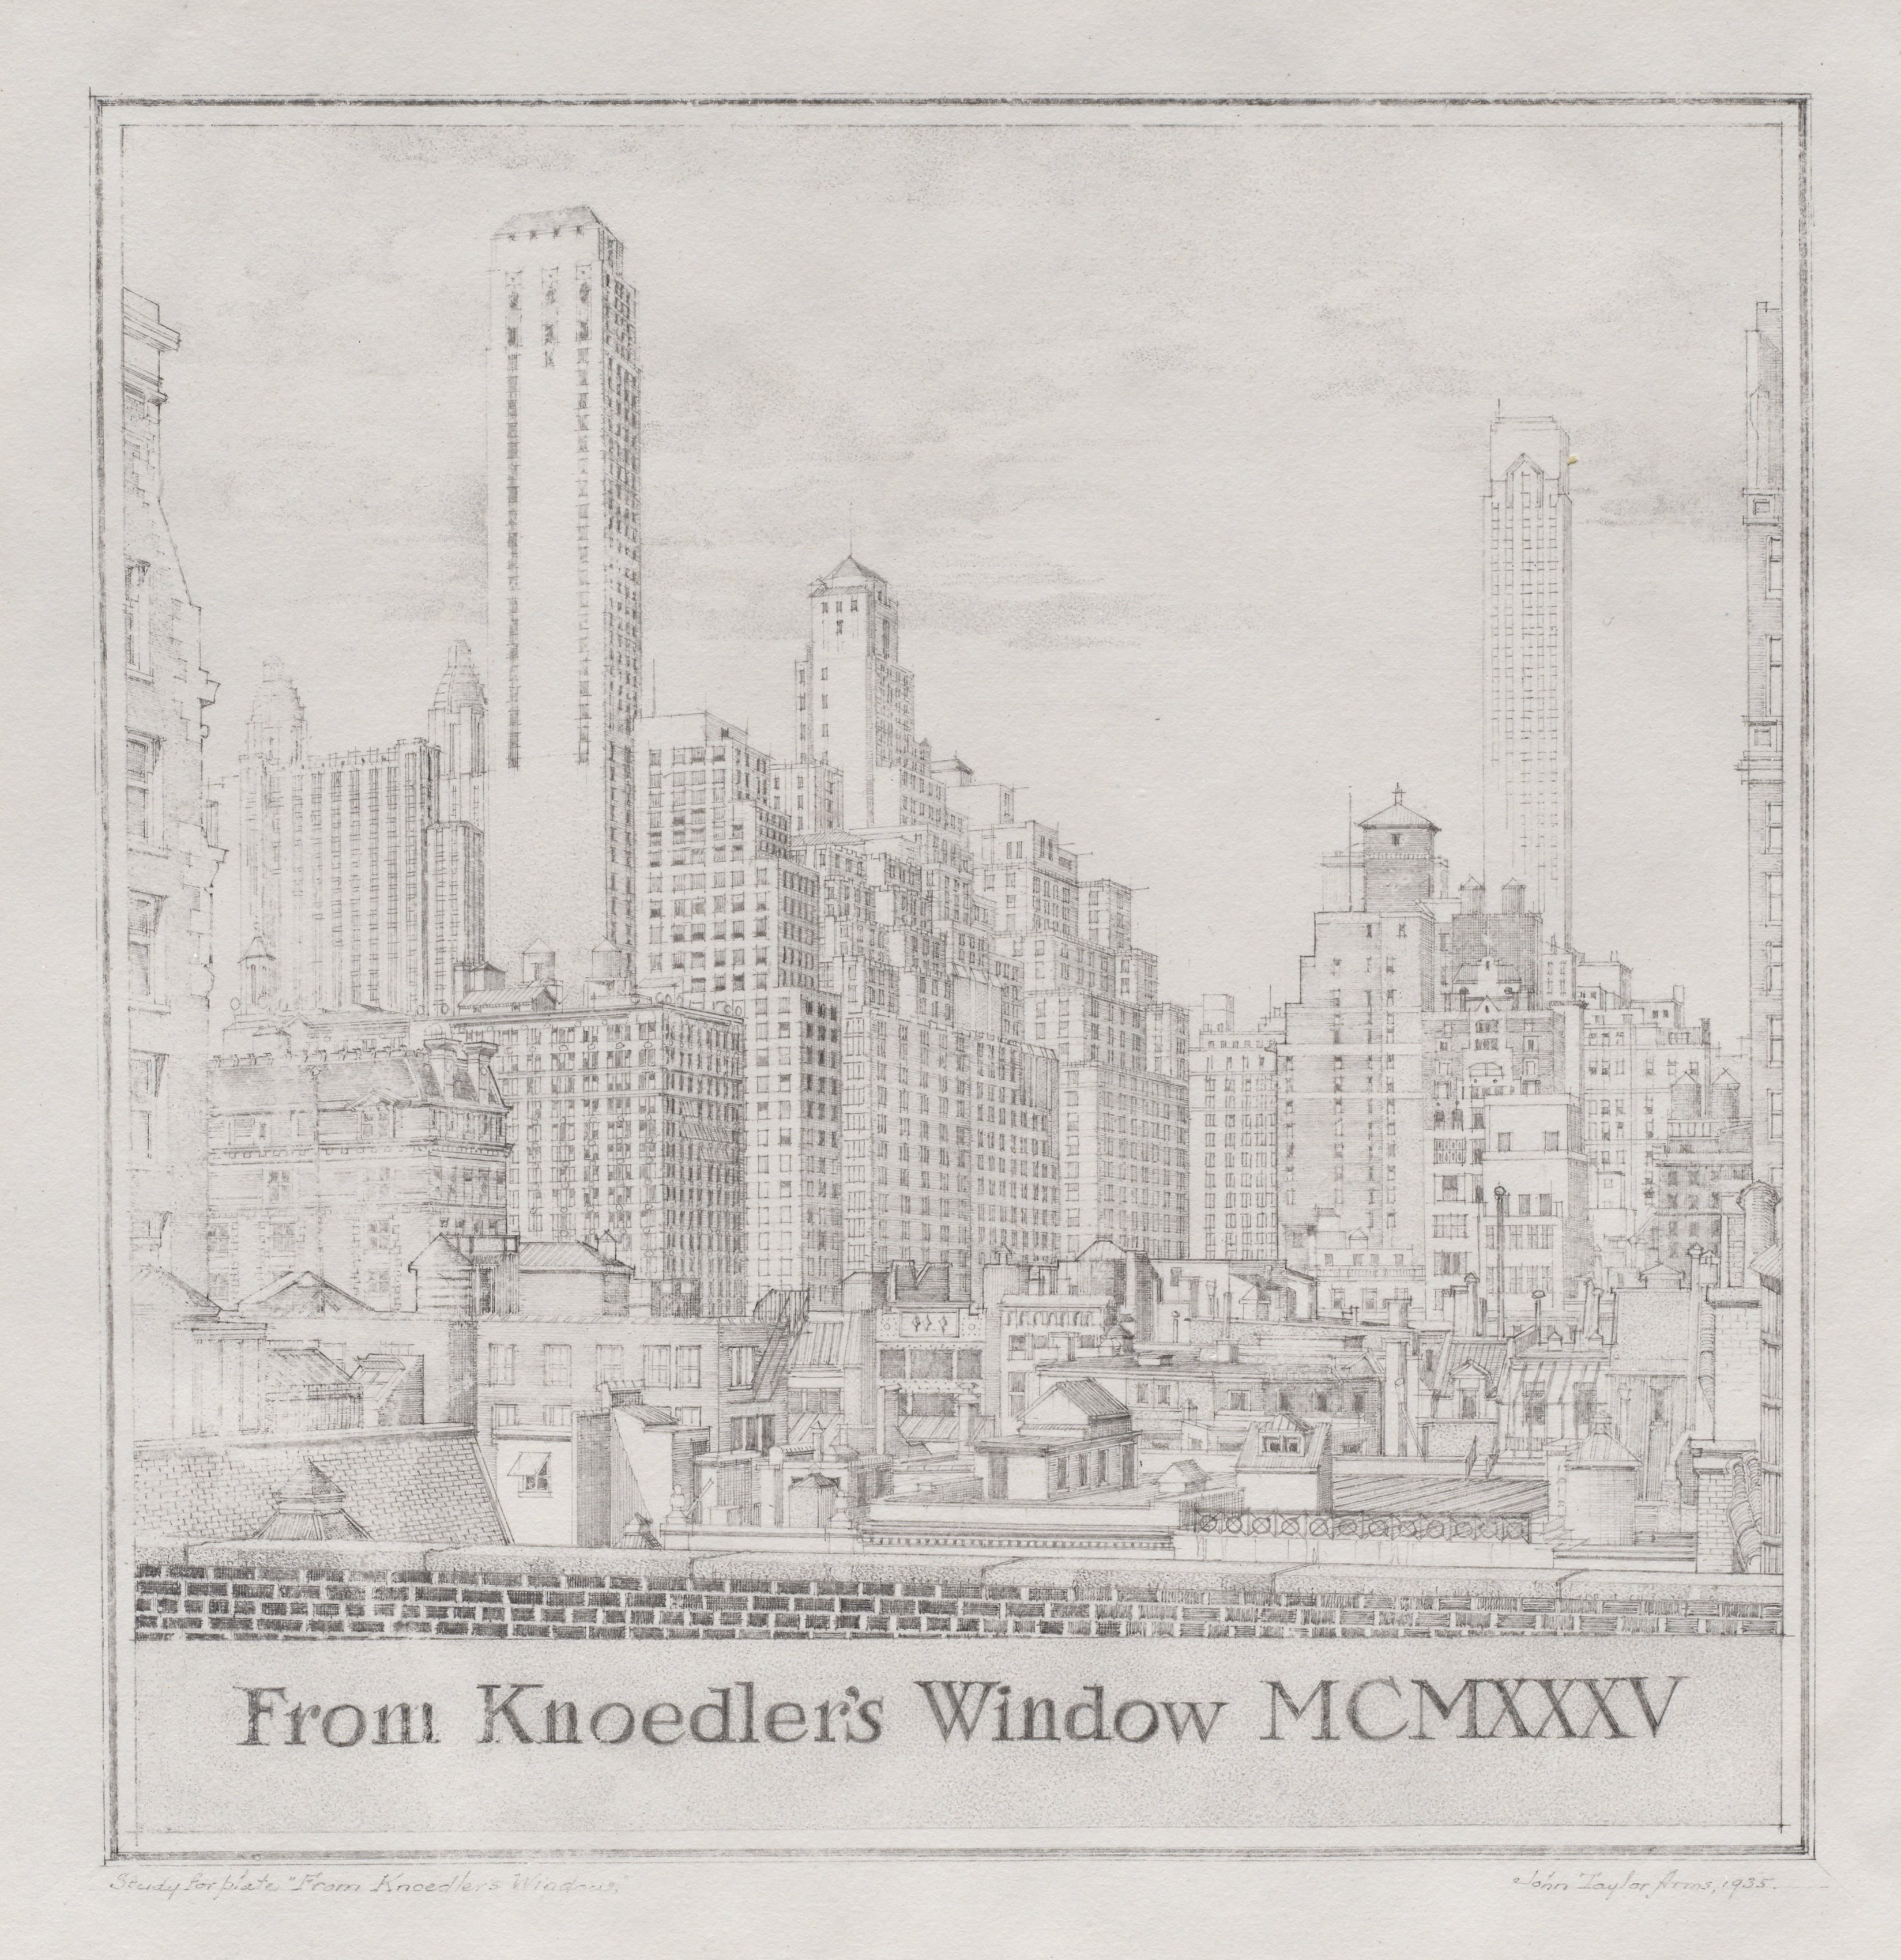 New York Series: Commission: From Knoedler's Window, MCMXXXV